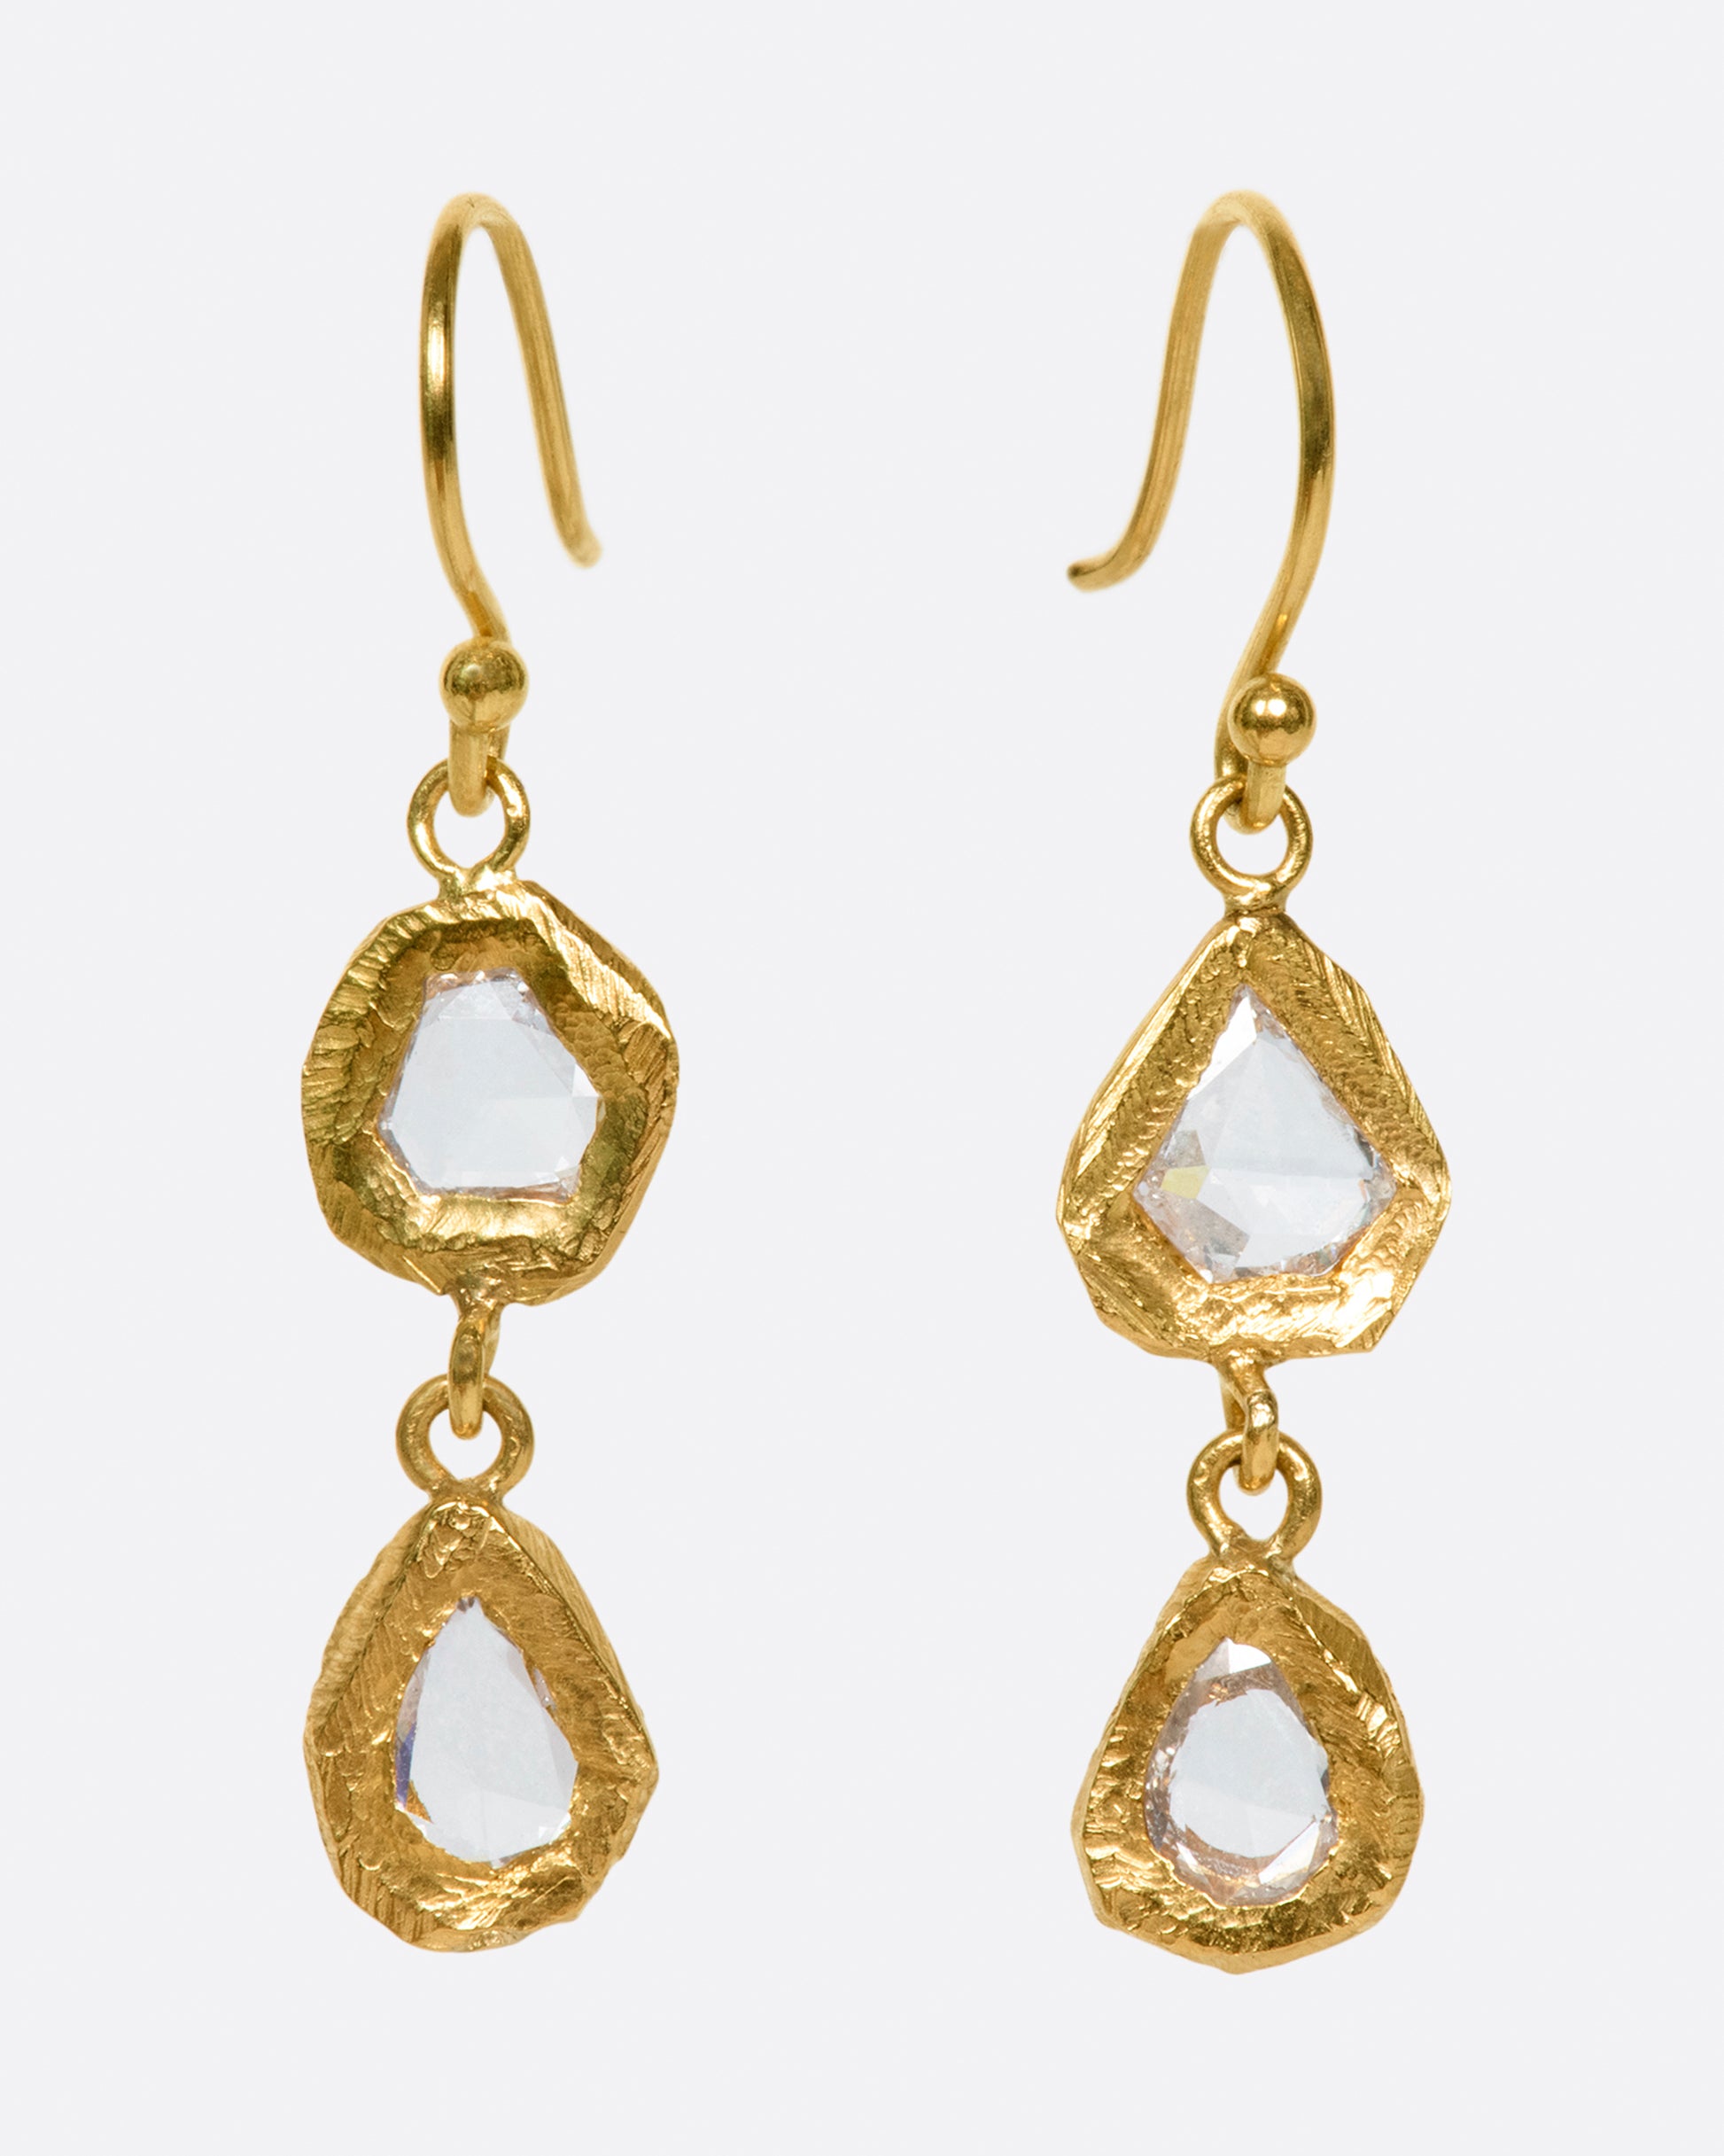 A pair of slightly asymmetrical diamond drop earrings with two diamonds set in hand carved bezels on each earring.